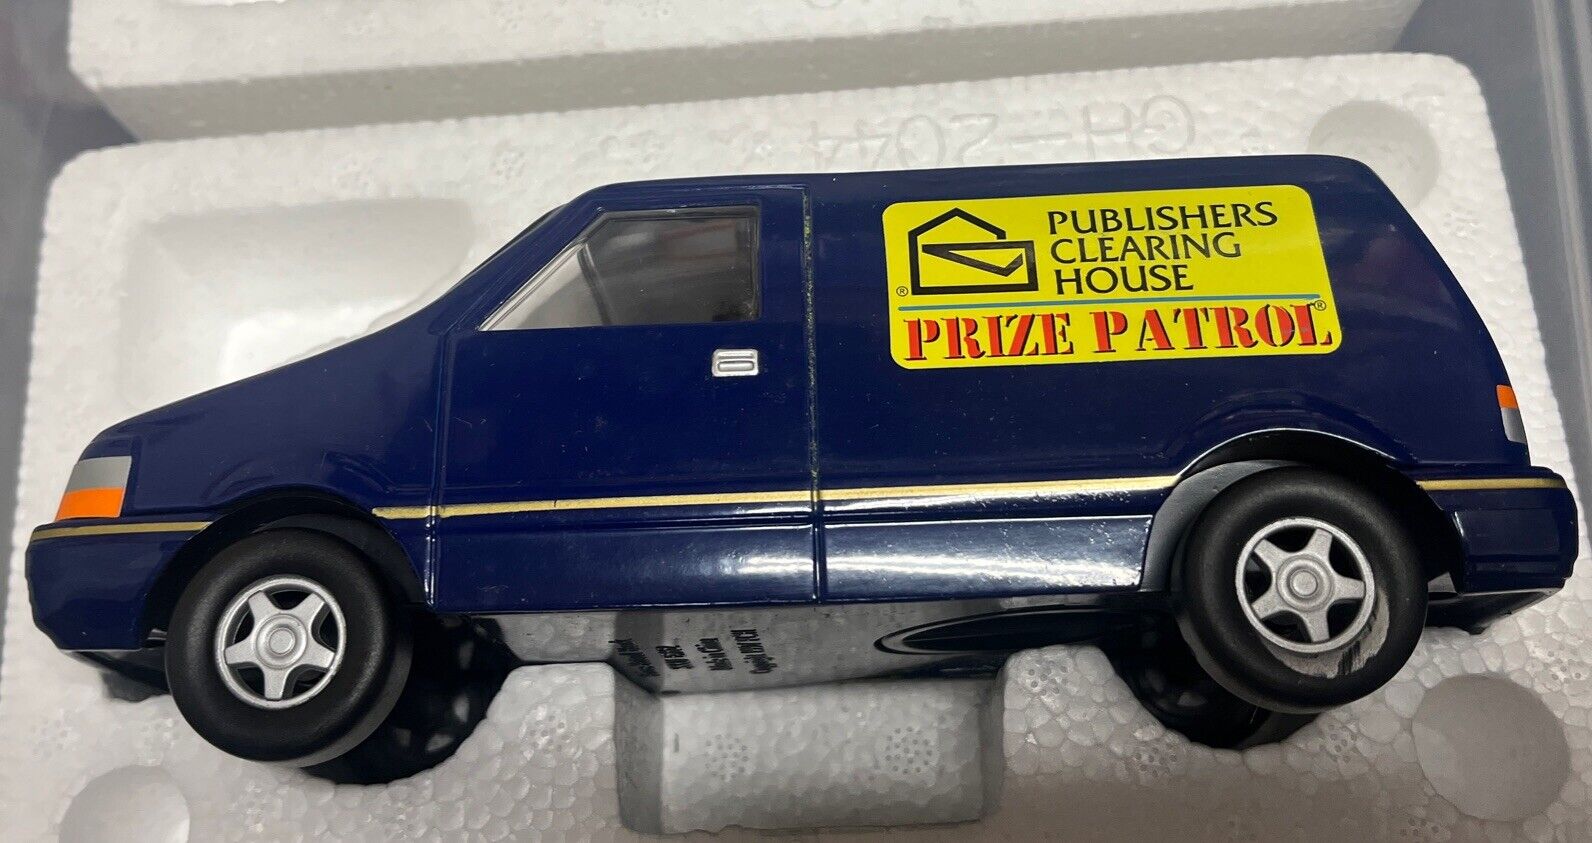 Publishers Clearing House Prize Patrol Coin Bank In Box 1997 Ed McMahon